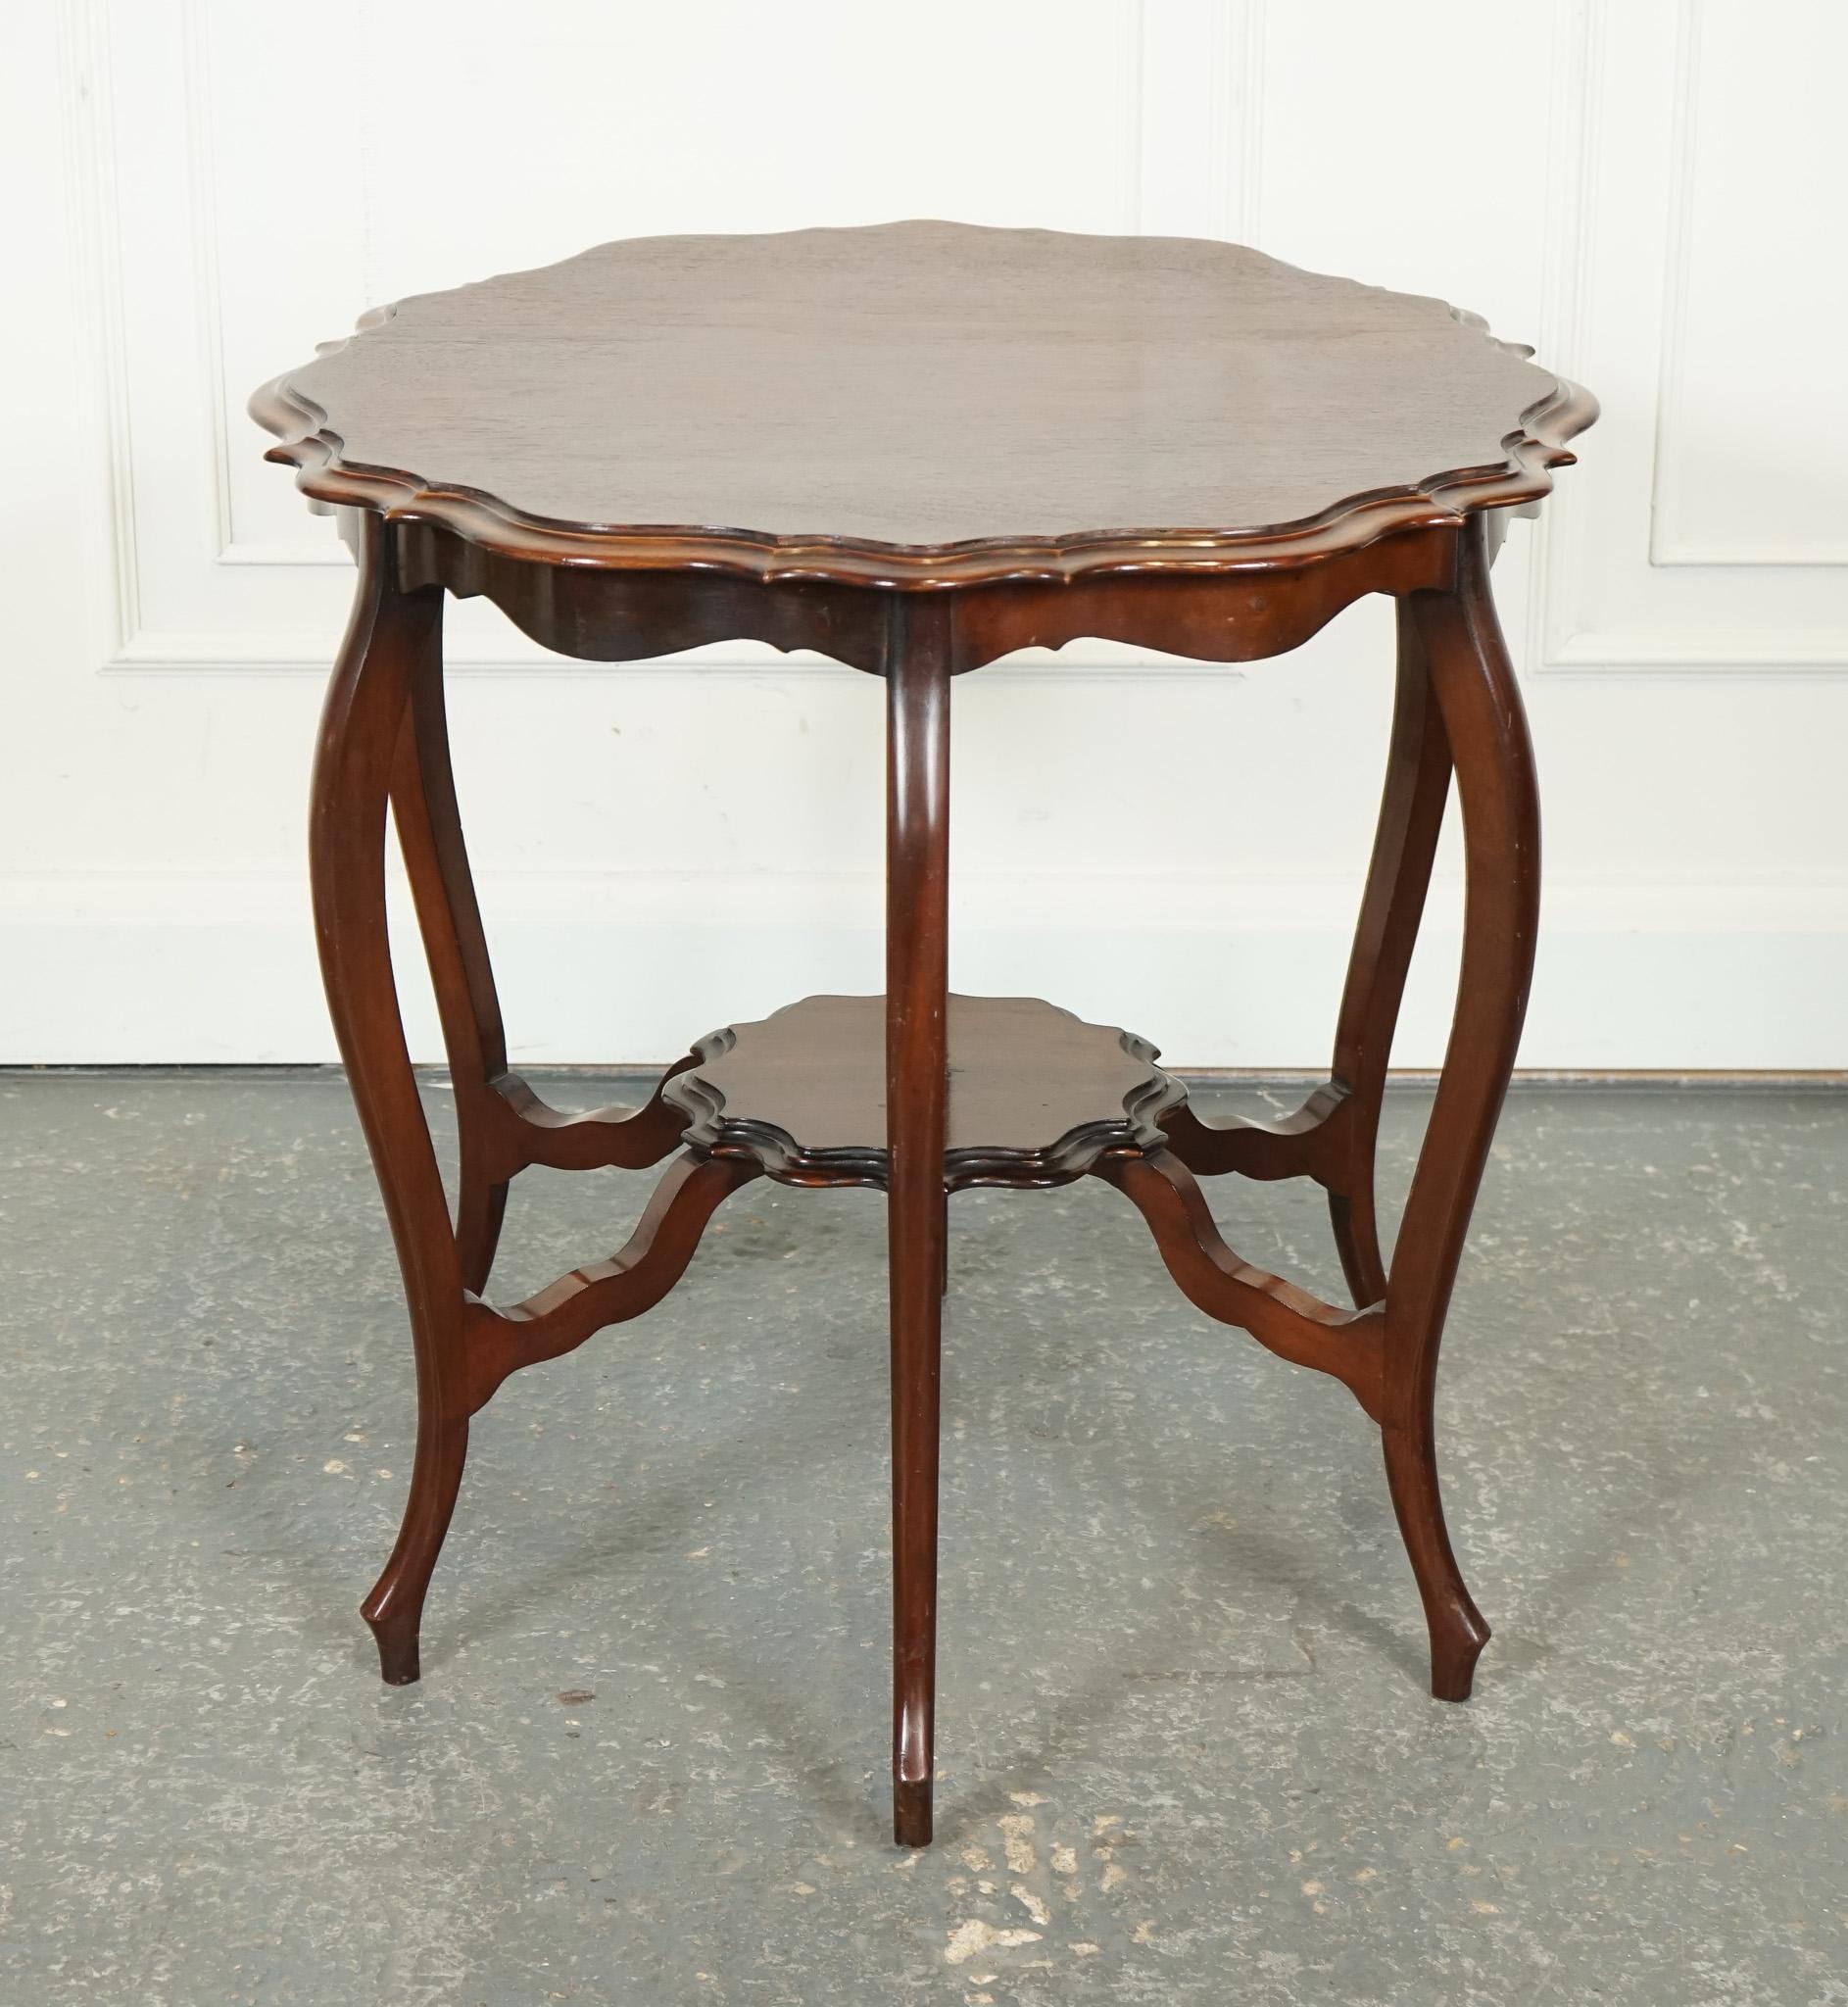 
We are delighted to offer for sale this Lovely Edwardian Walnut Side End Table.

An Edwardian walnut side end occasional centre table is a classic and elegant piece of furniture.

With its timeless design and rich walnut finish, an Edwardian walnut